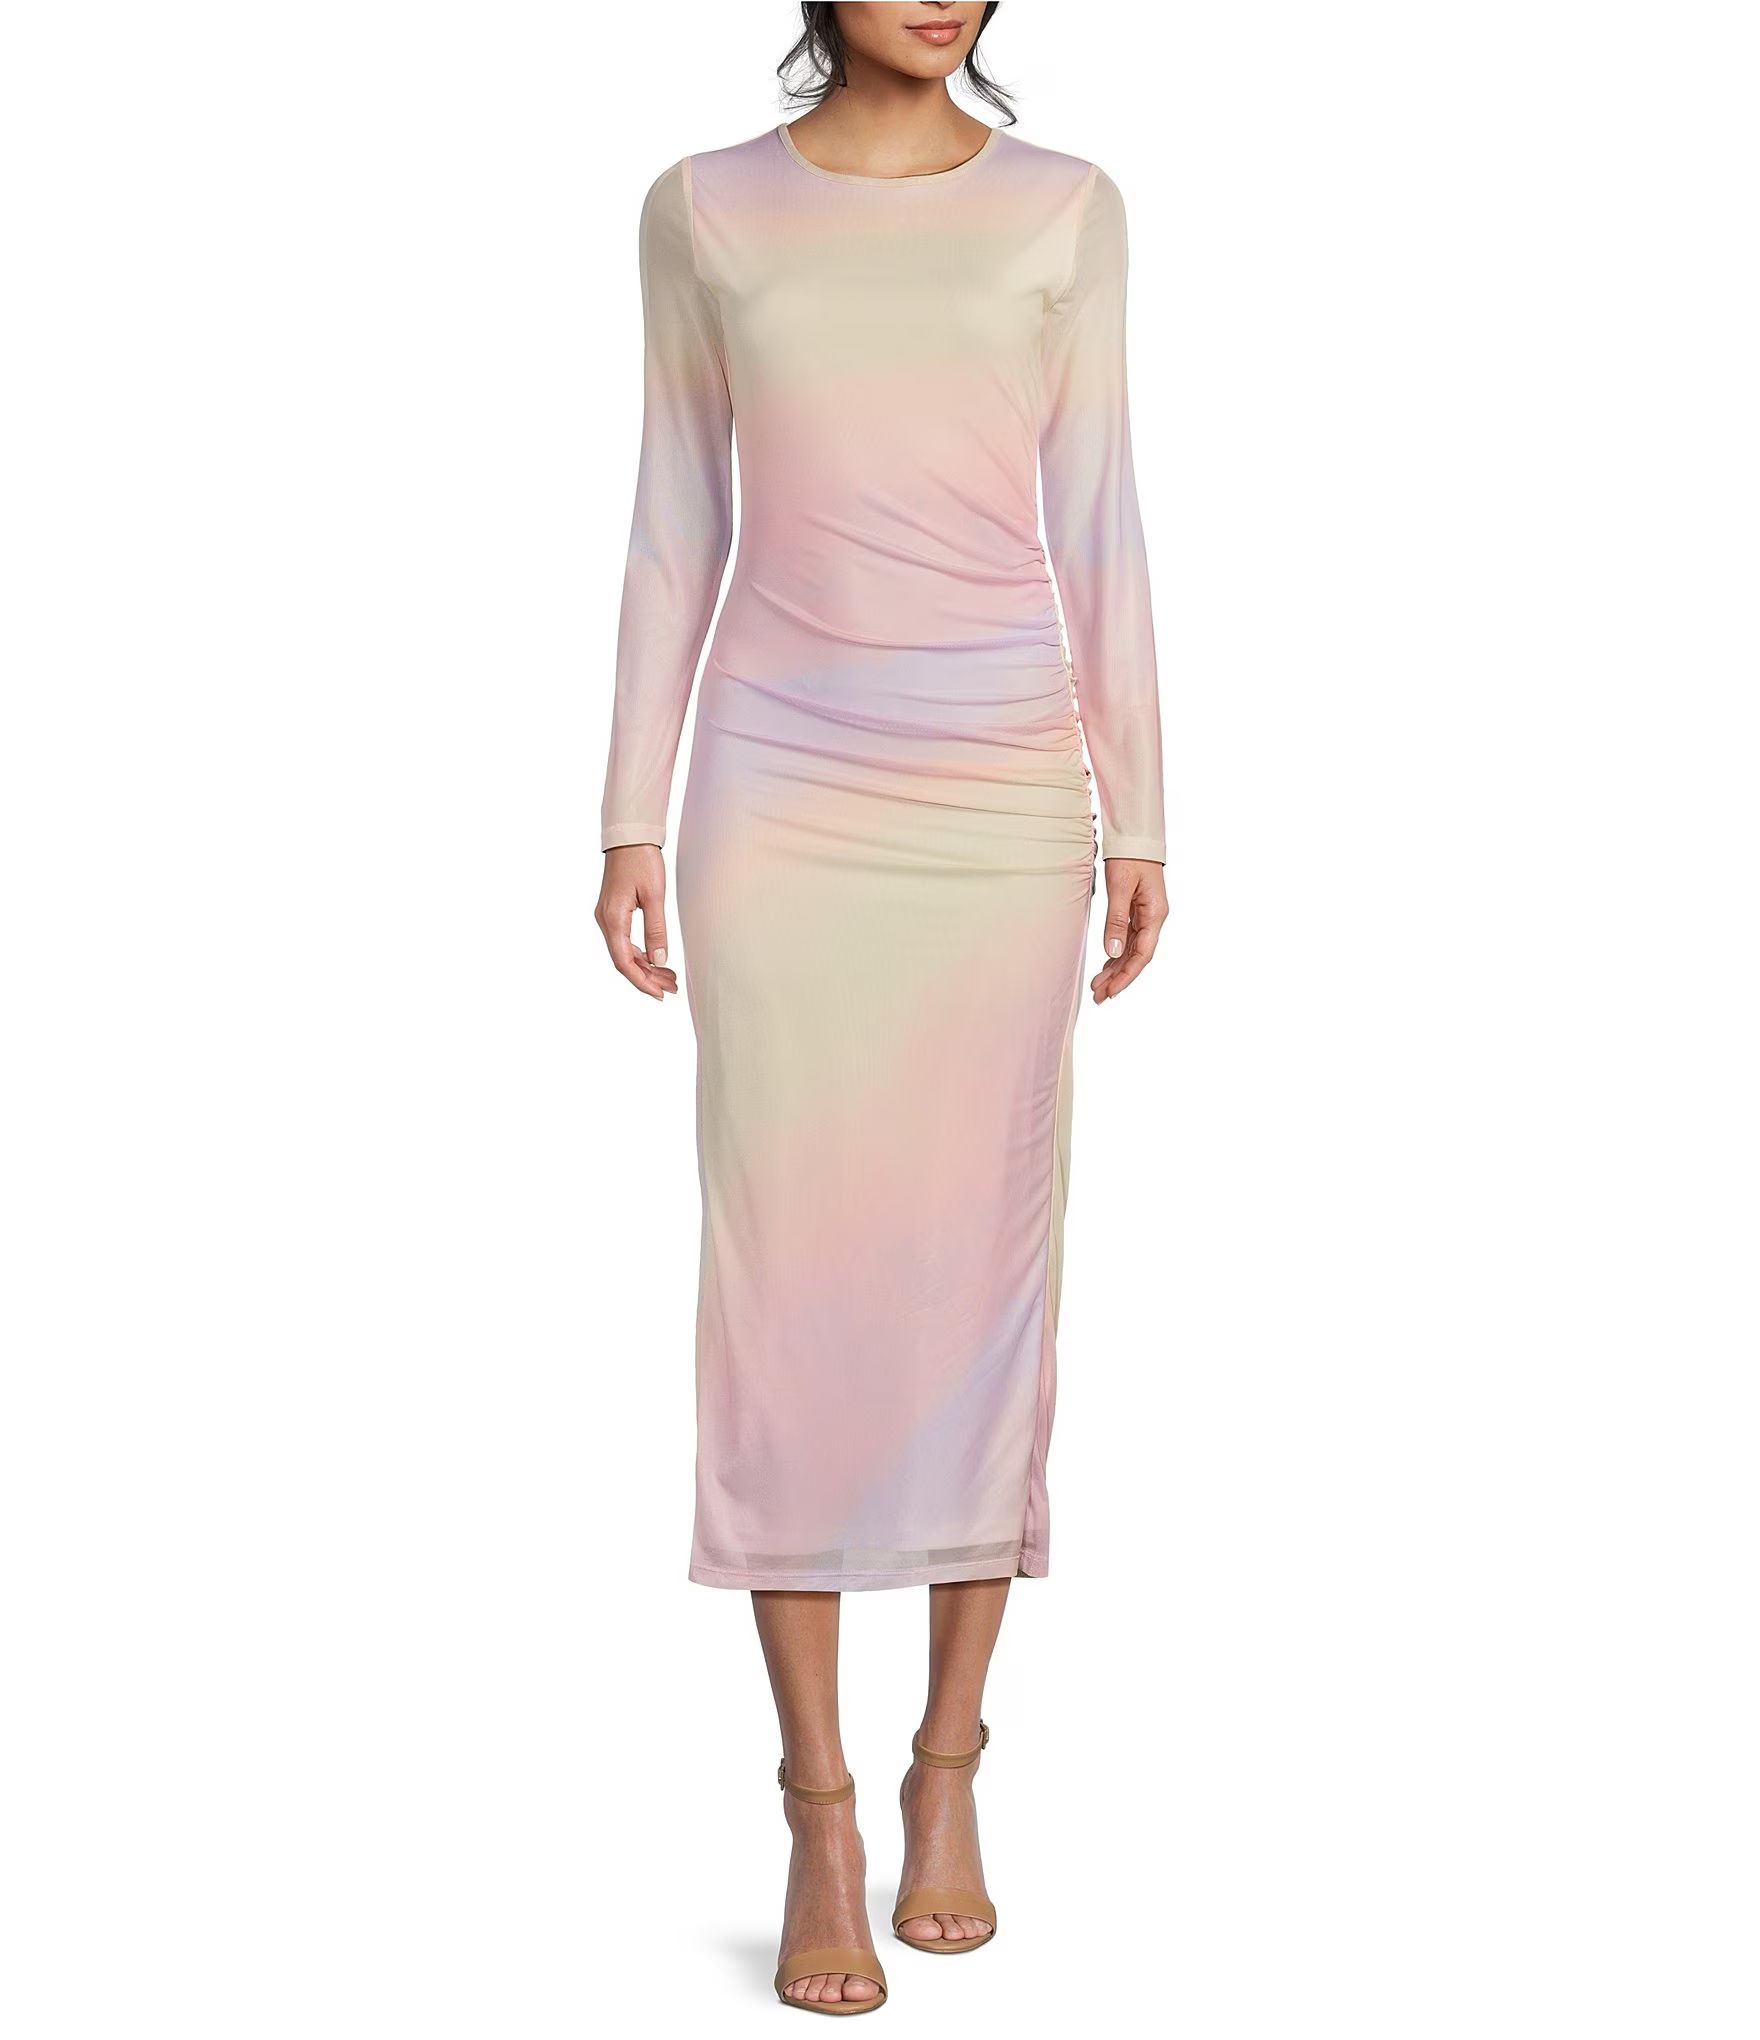 GBLong Sleeve Ombre Mesh Midi DressPermanently ReducedOrig. $54.00Now $32.40Rated 5 out of 5 star... | Dillard's